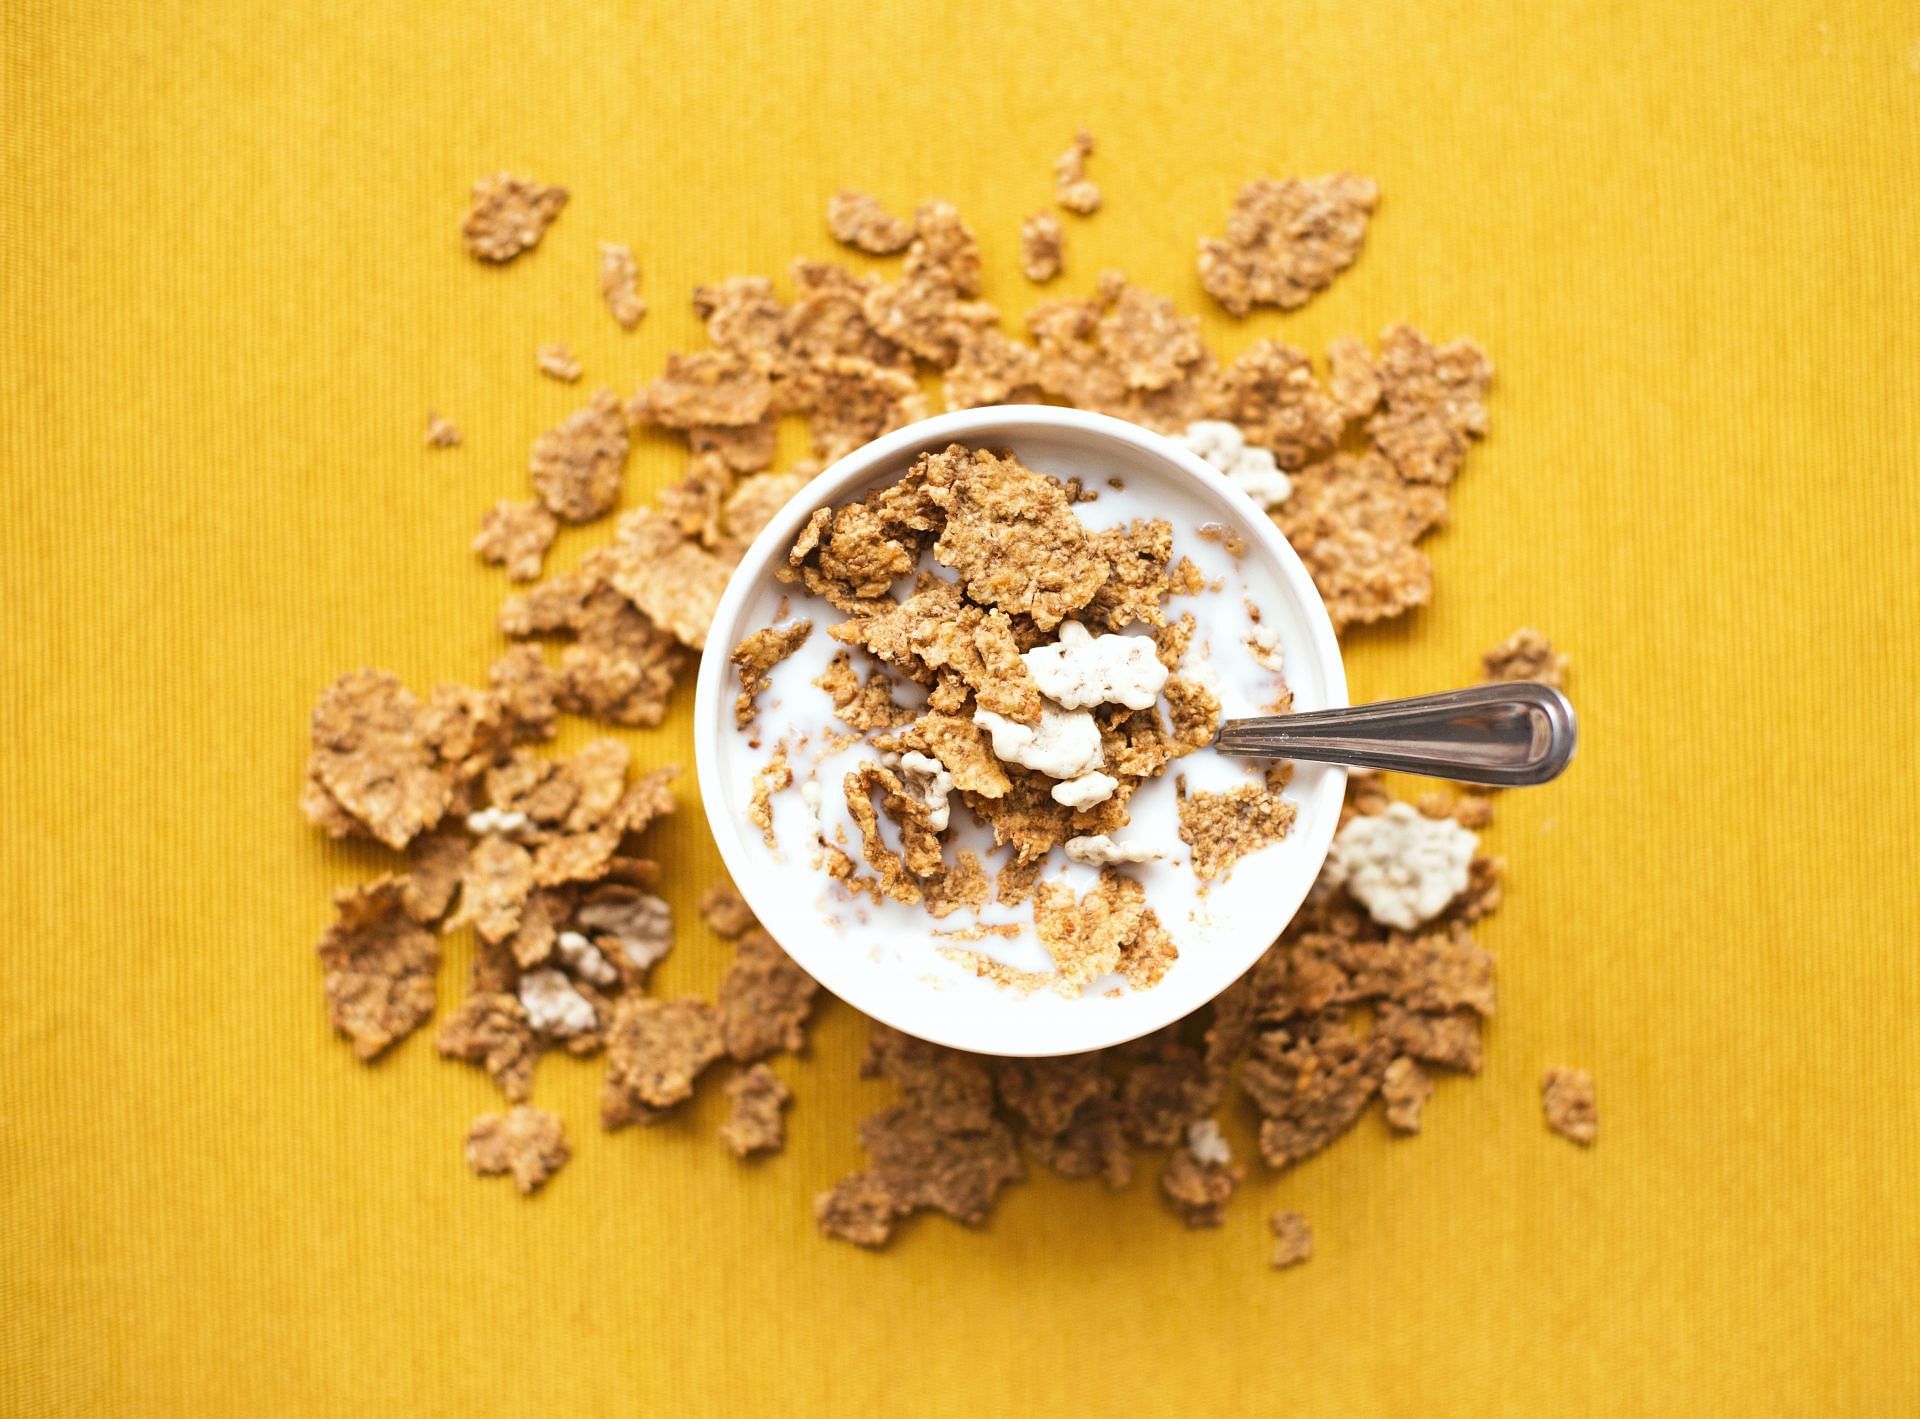 How to choose a healthy cereal? (Image via Unsplash/Nyana Stoica)